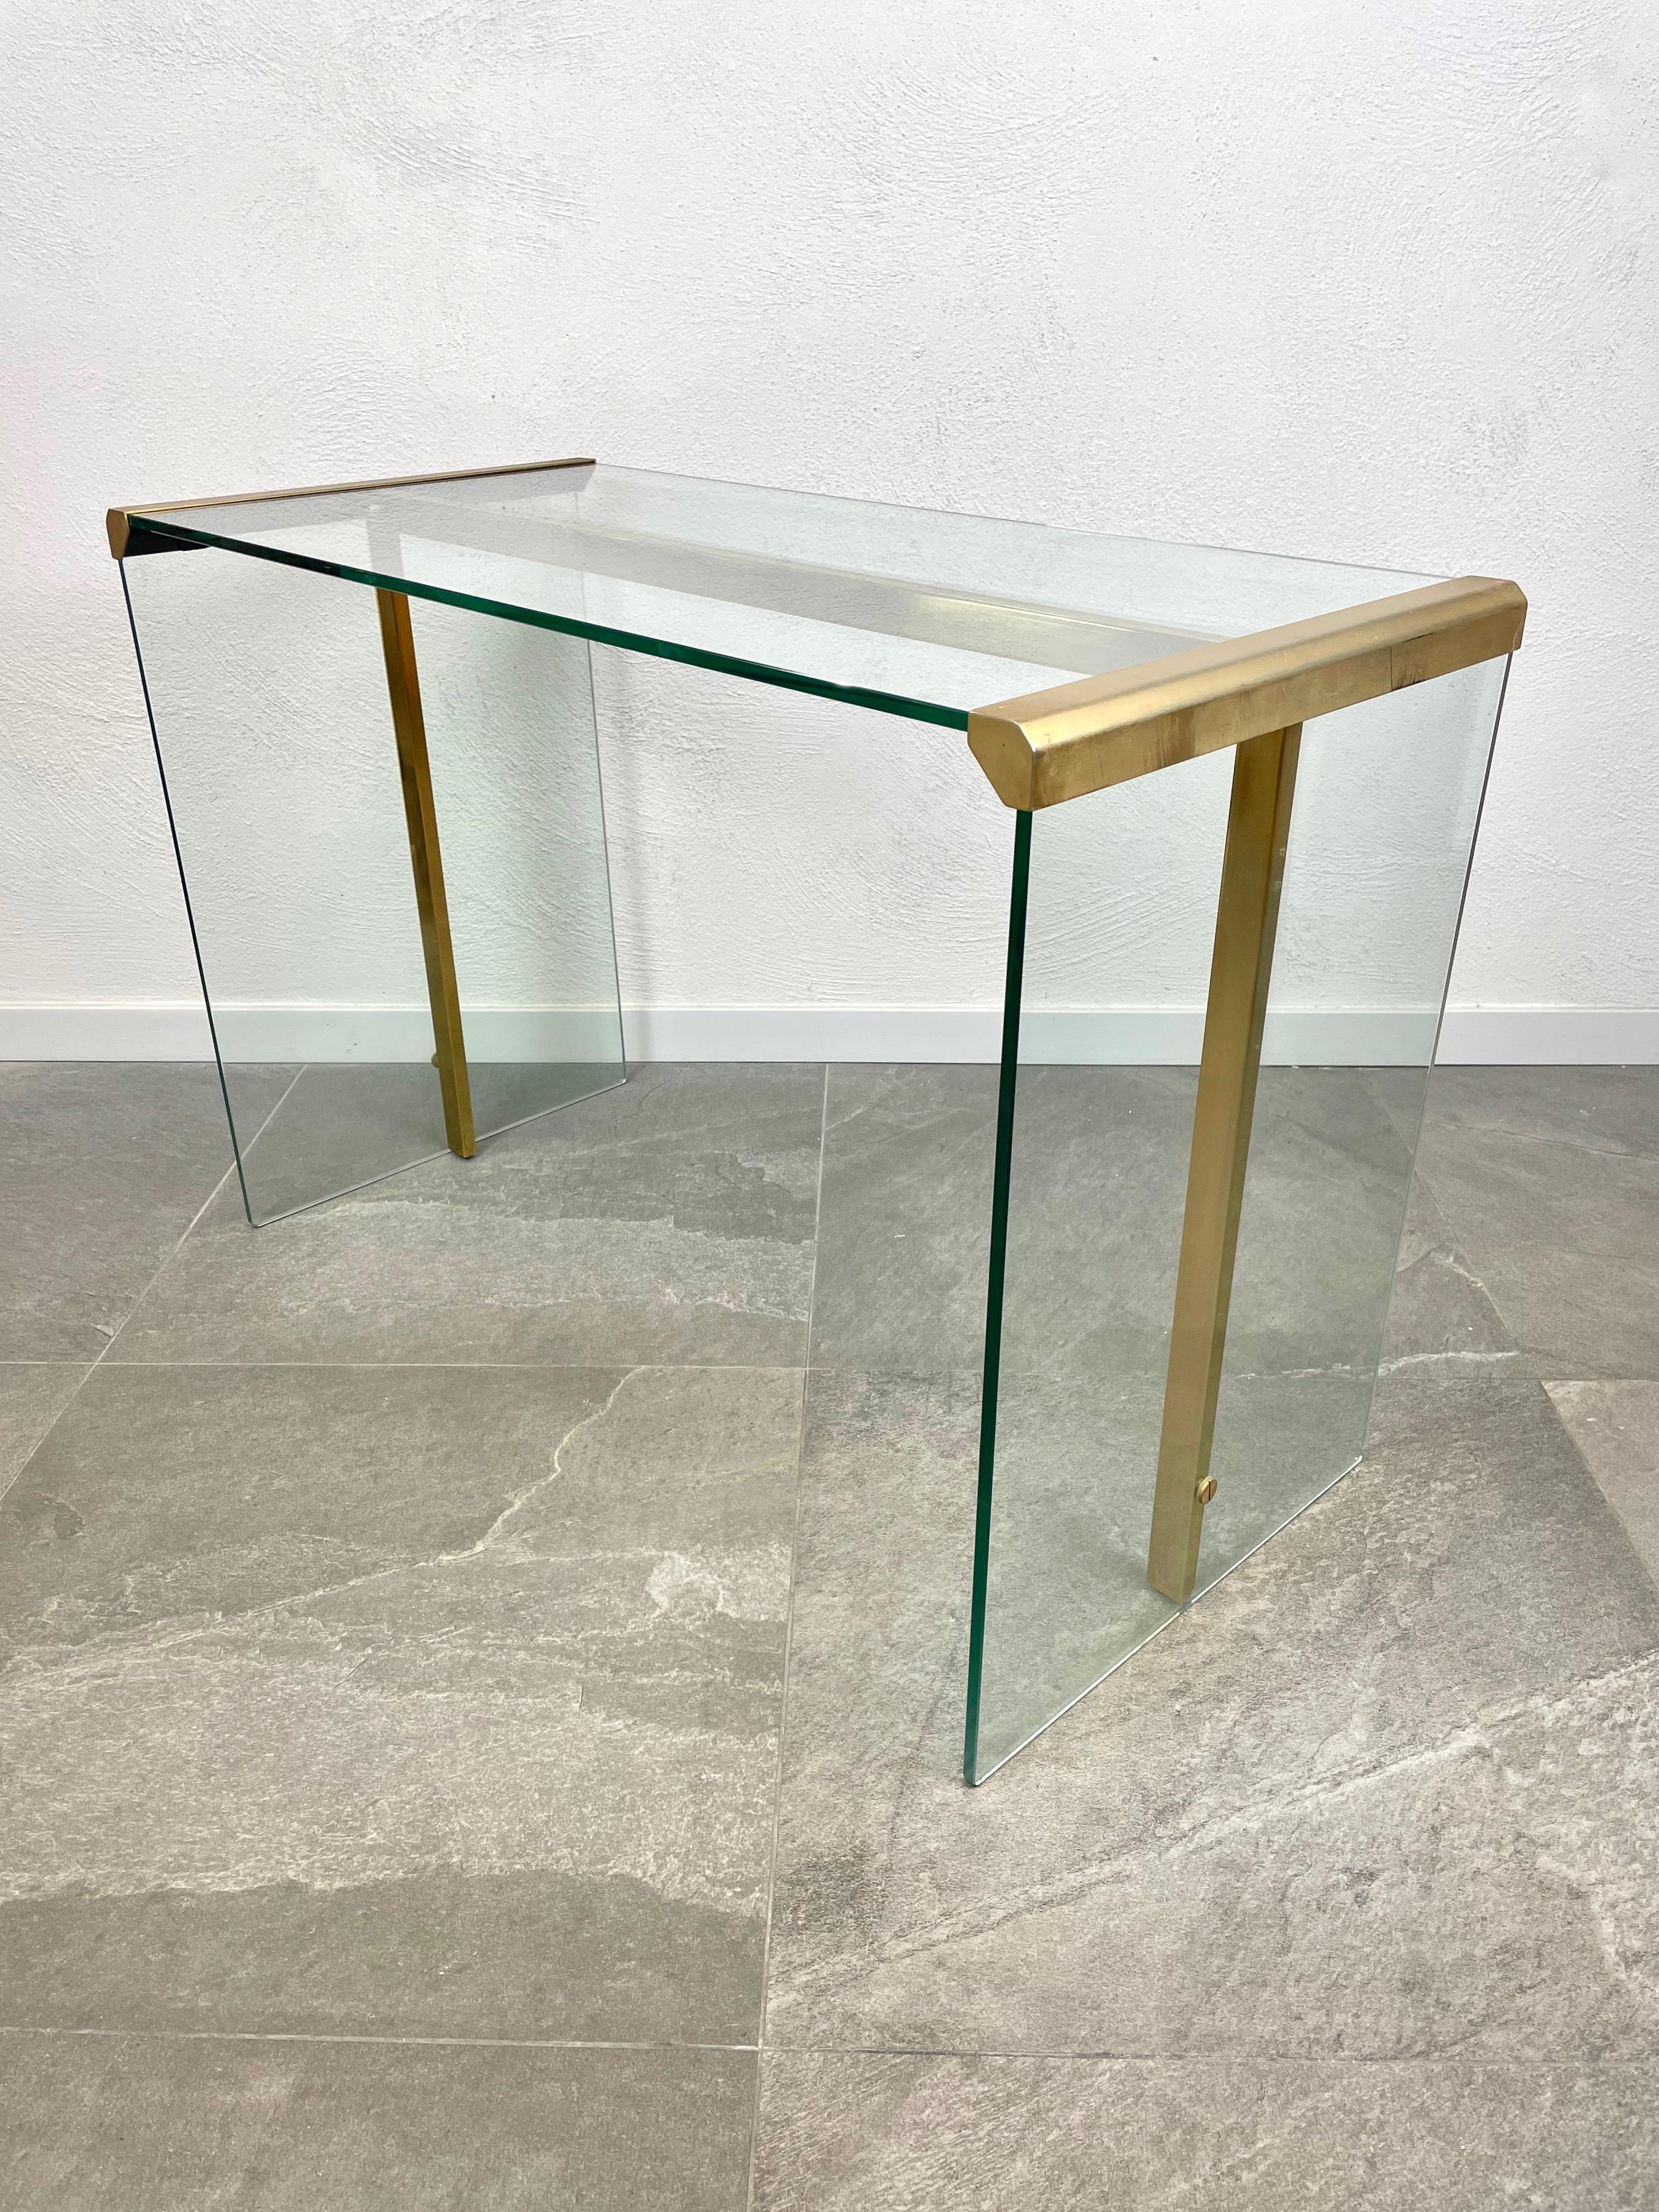 Late 20th Century Mid-Century Modern Console Table Glass and Brass Gallotti & Radice, Italy, 1970s For Sale